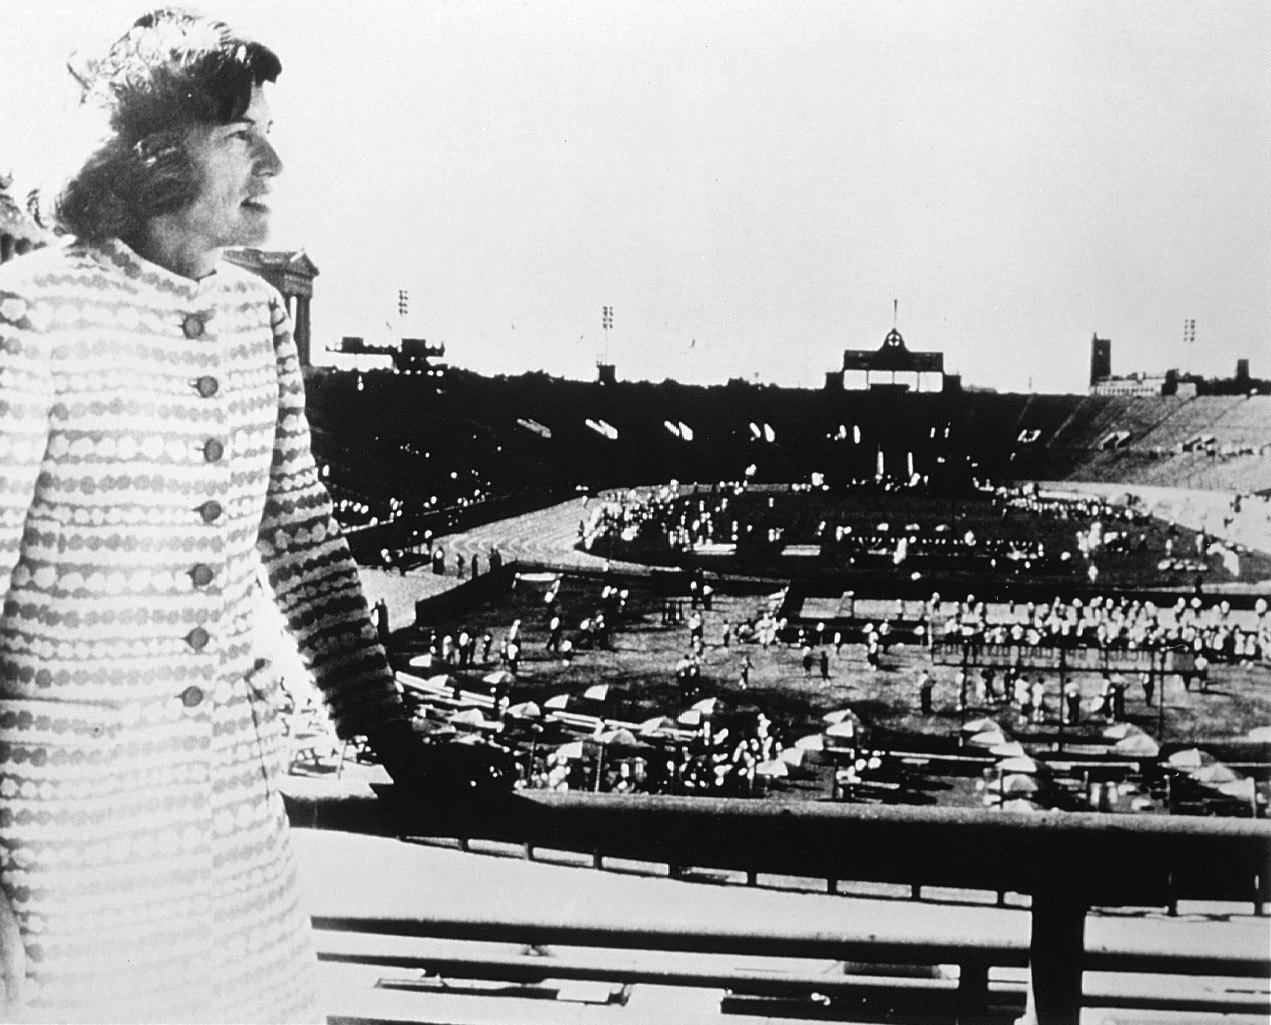 Eunice Kennedy Shriver overlooks Soldier Field at the 1968 Games.